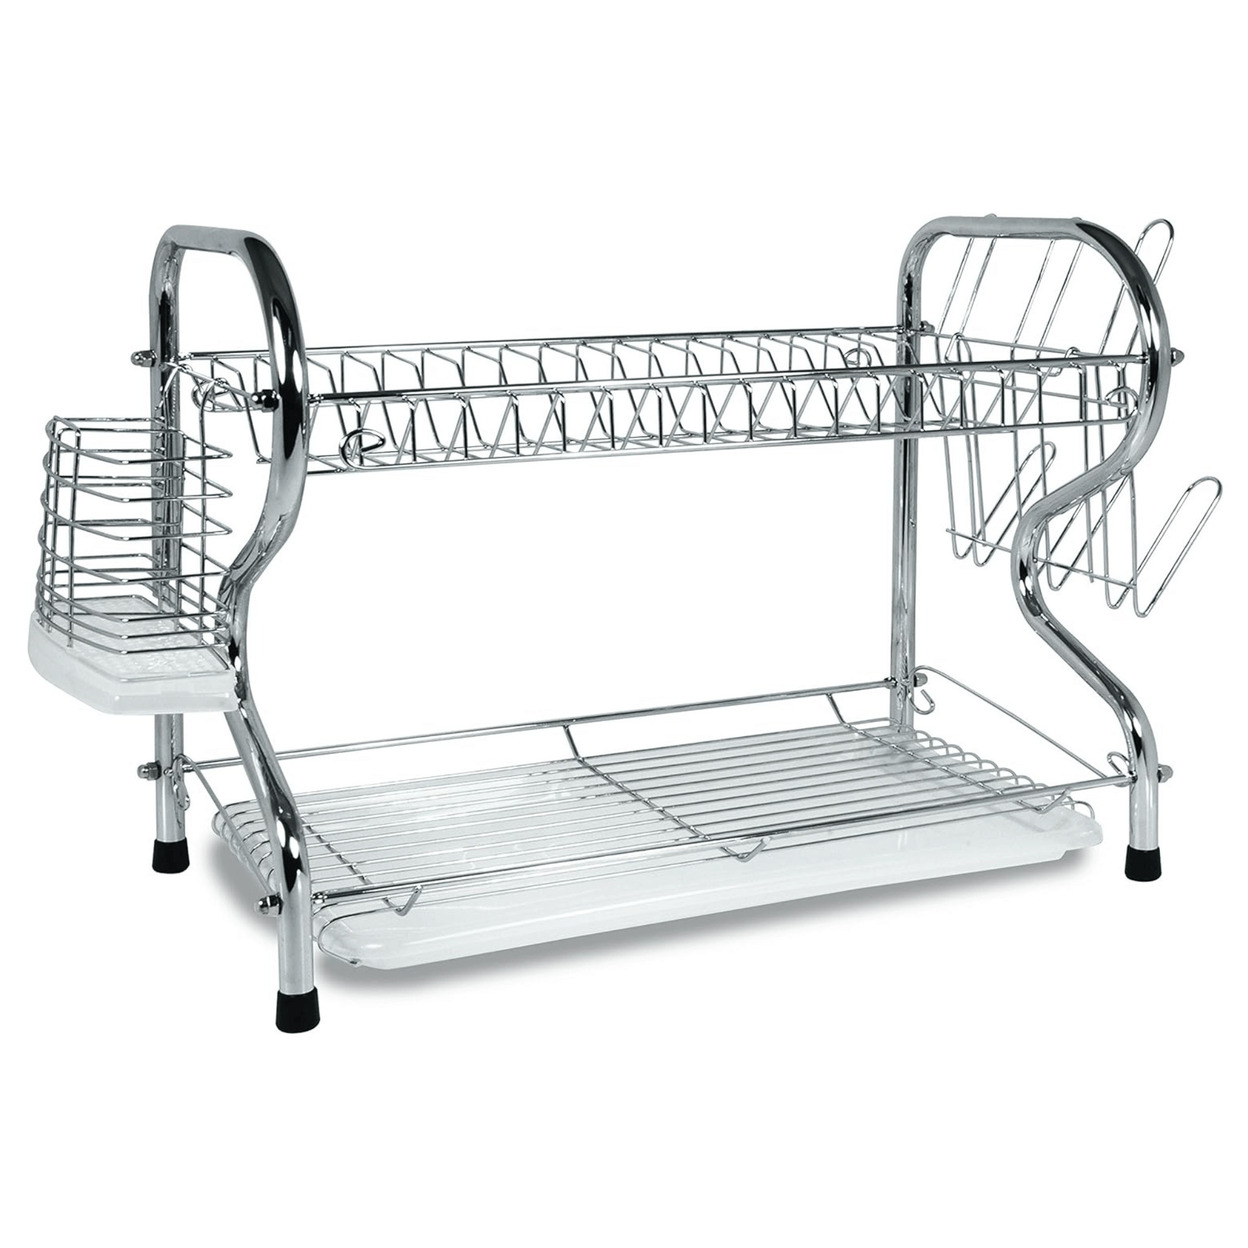 Better Chef 22" 2-Level Chrome-Plated R-Shaped Dish Rack